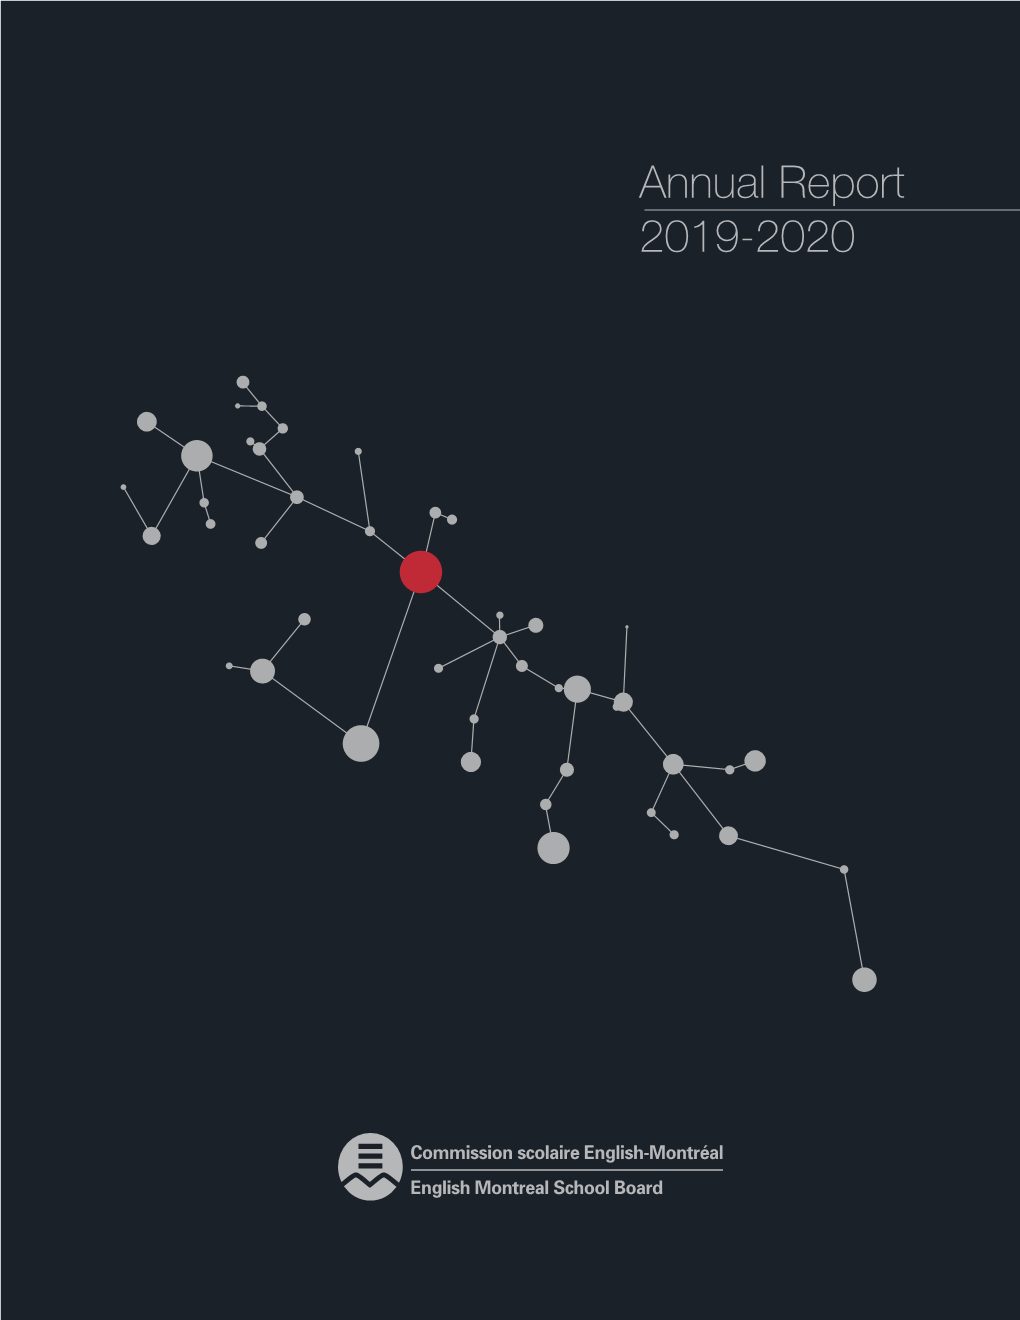 2019 – 2020 Annual Report Is a Publication of the Communications and Marketing Division of the English Montreal School Board